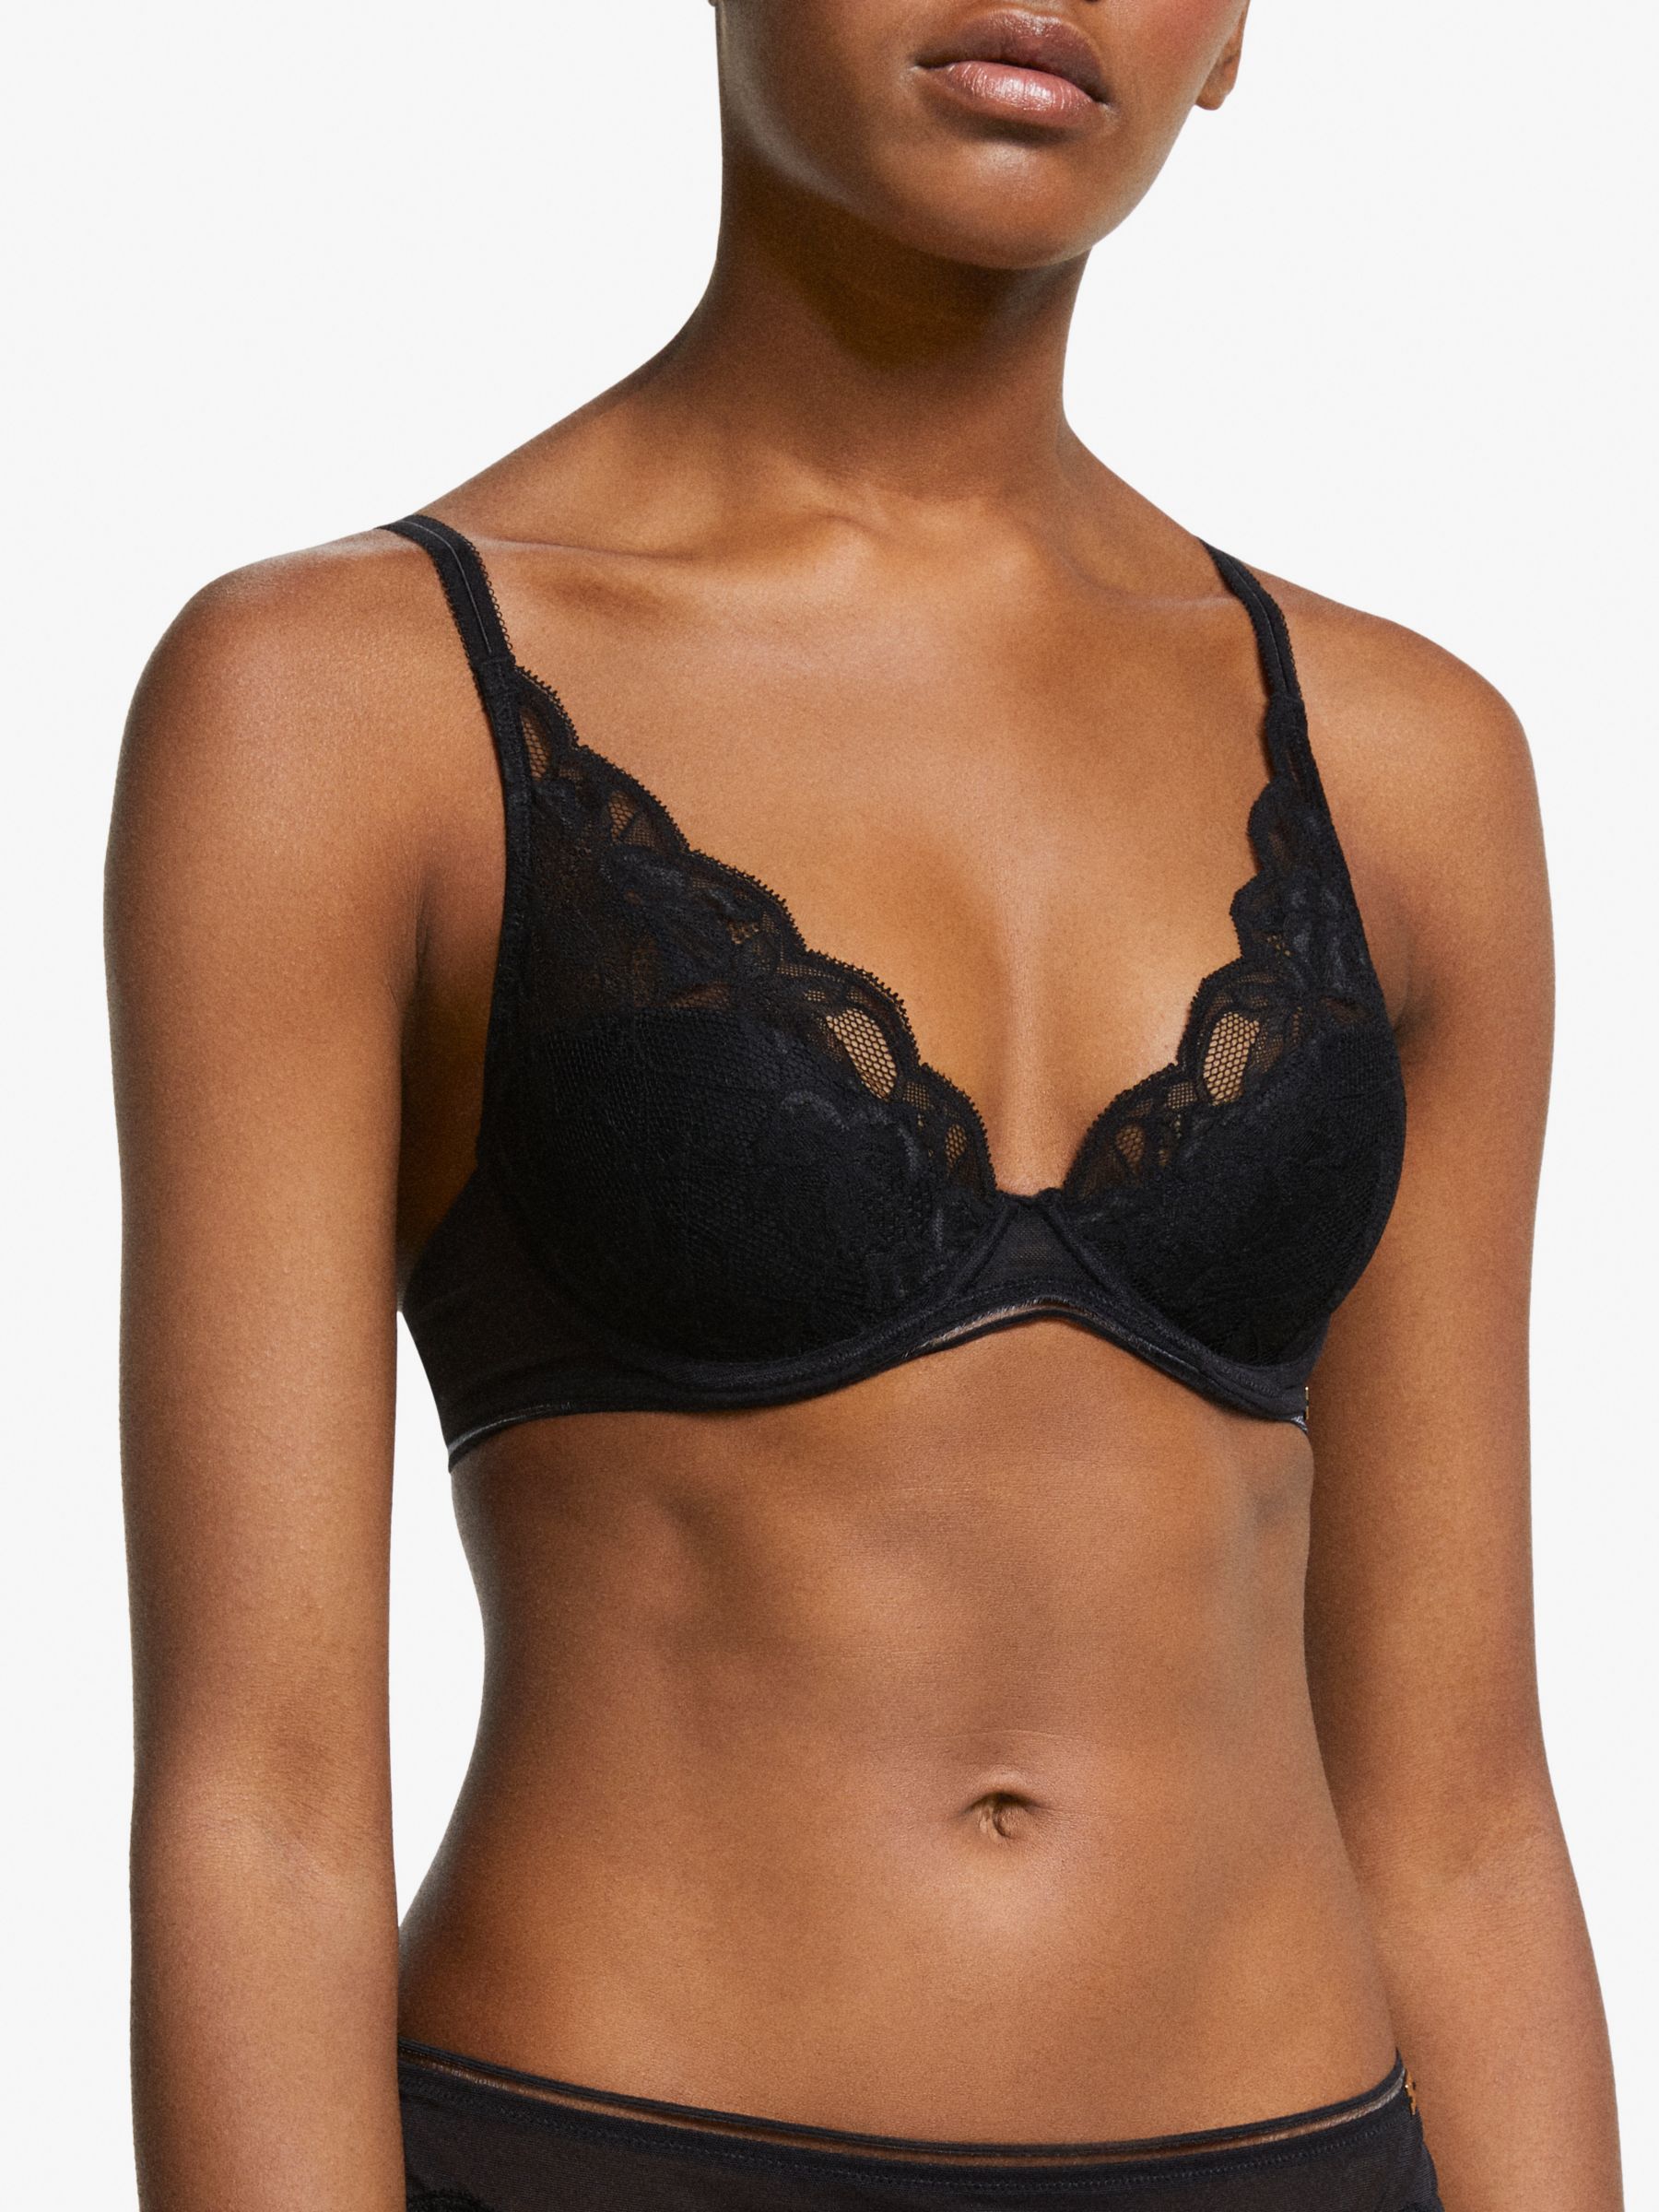 AND/OR Wren Lace Underwired Plunge Bra, B-F Cup Sizes, Black